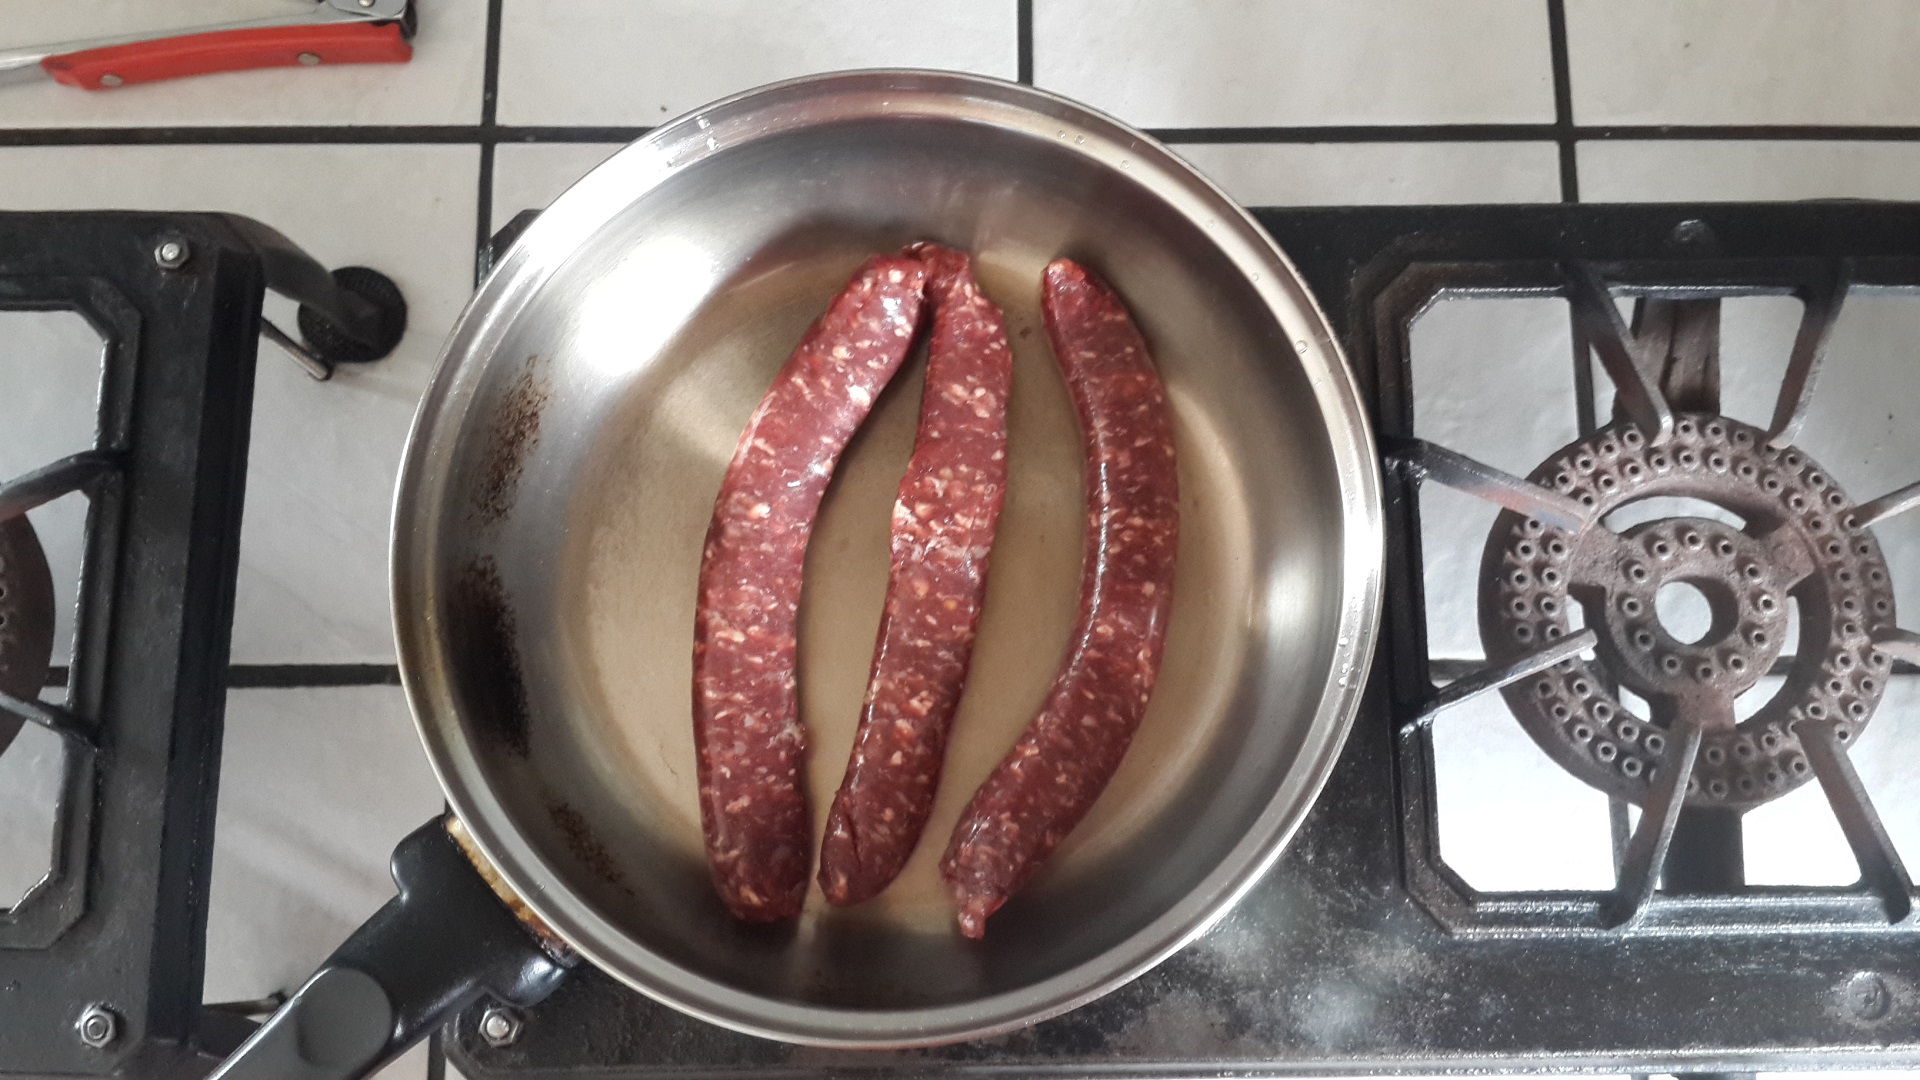 Pletenberg Bay, Ostrich meat sausages. Ostrich meat is fairly common in grocery stores in South Africa.